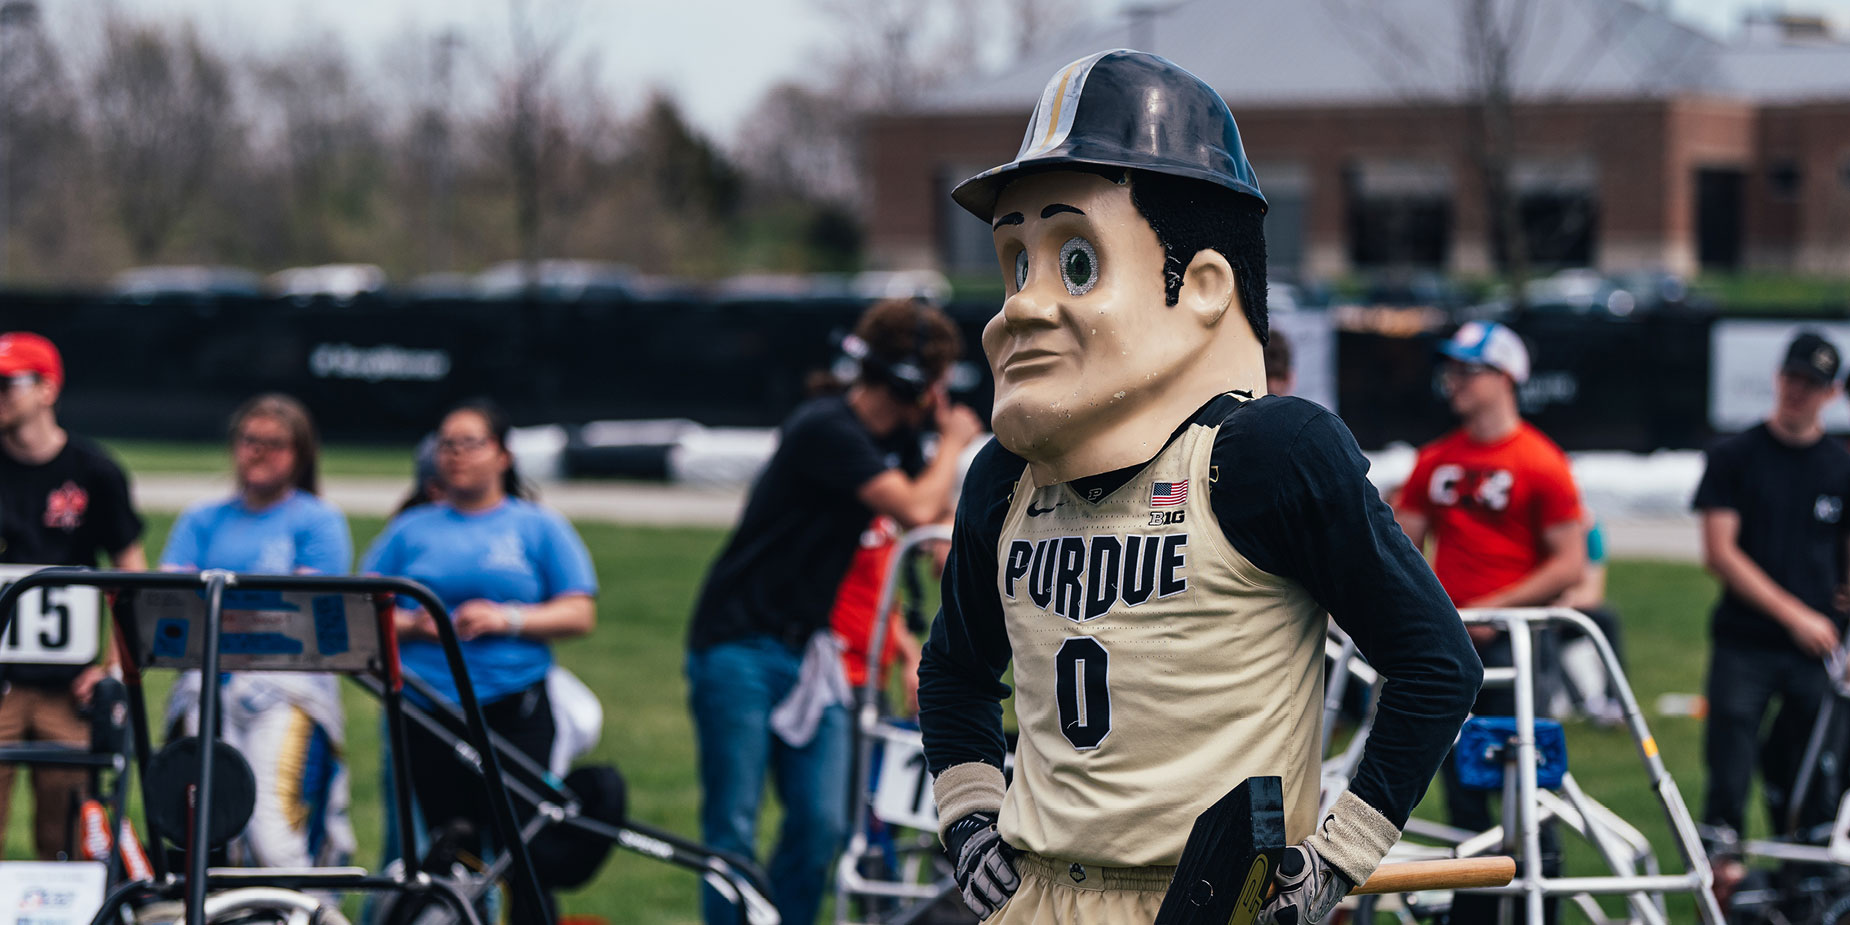 Purdue Pete on the track of the 2022 Purdue Grand Prix, with racing carts and spectators in the background.